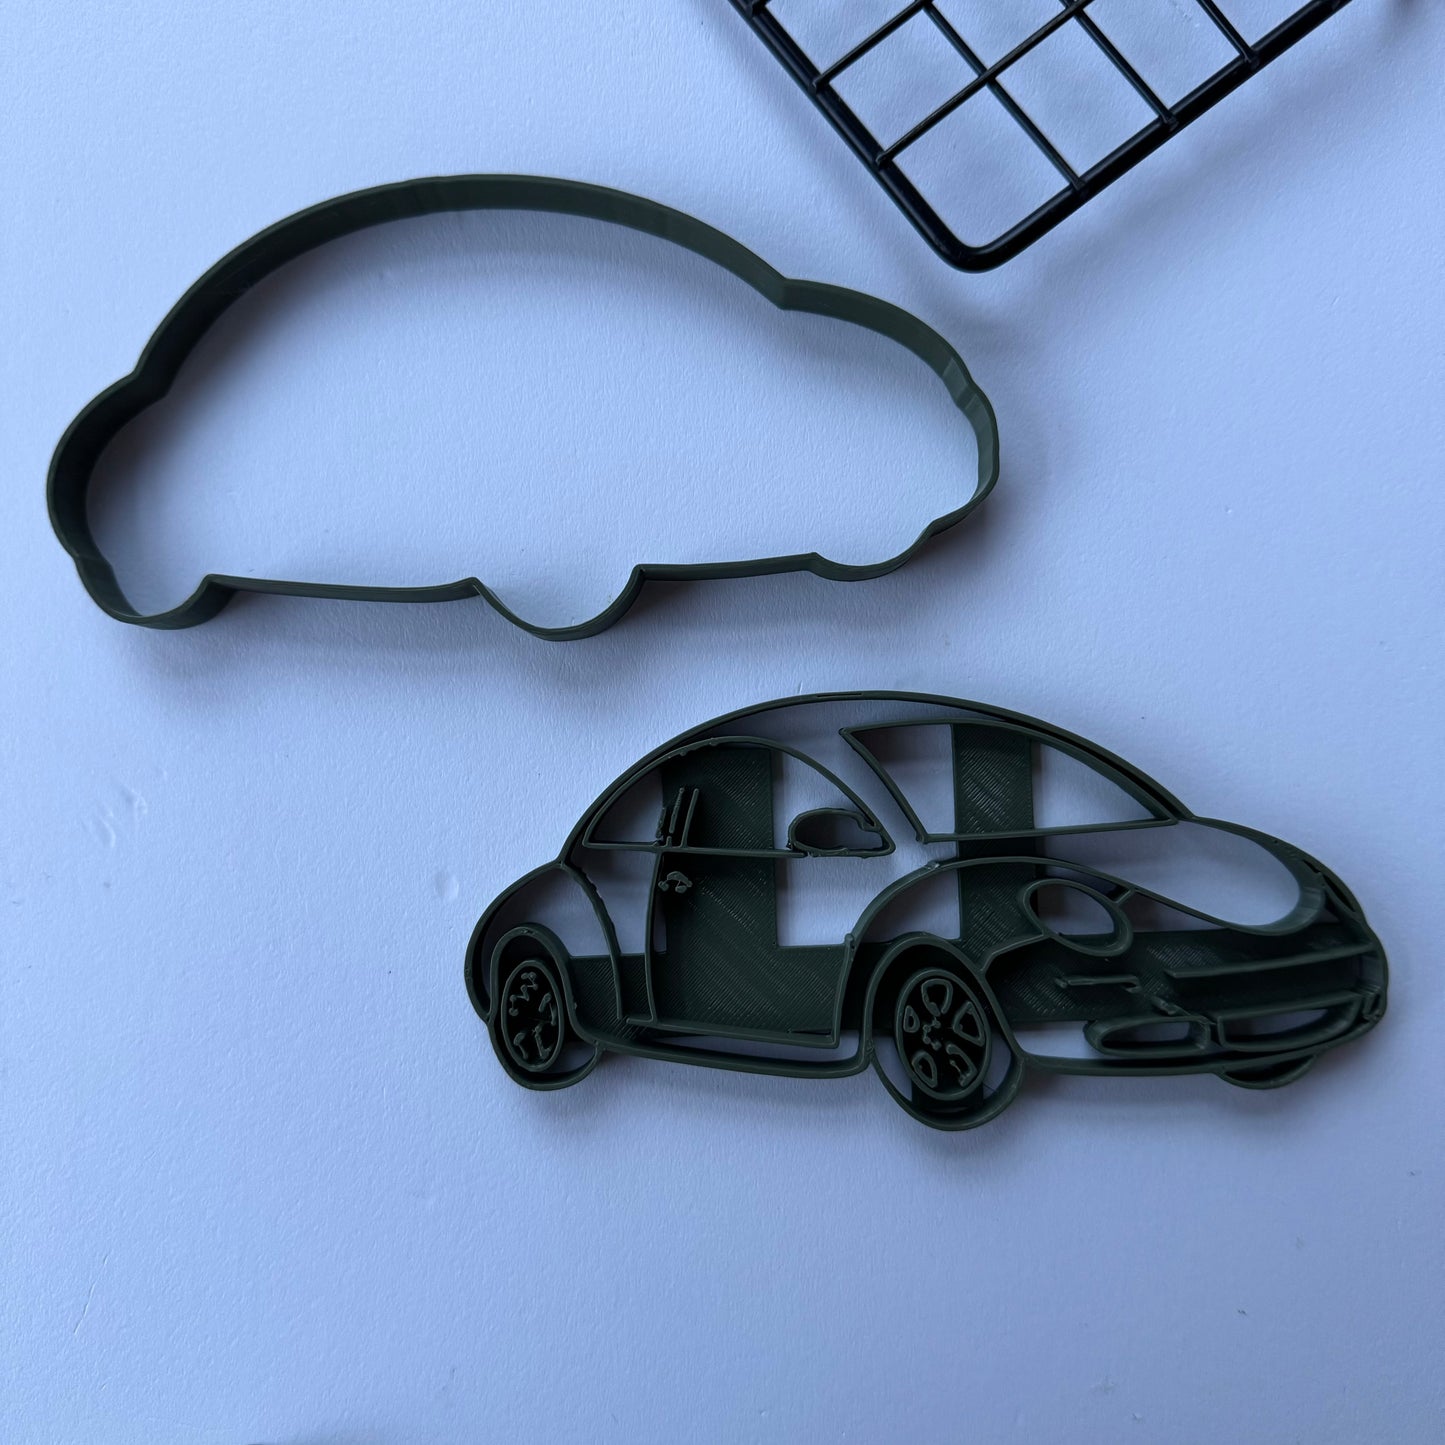 VW-INSPIRED car Side cookie cutters Uk Plastic Cookie Cutter Fondant Cake Decorating